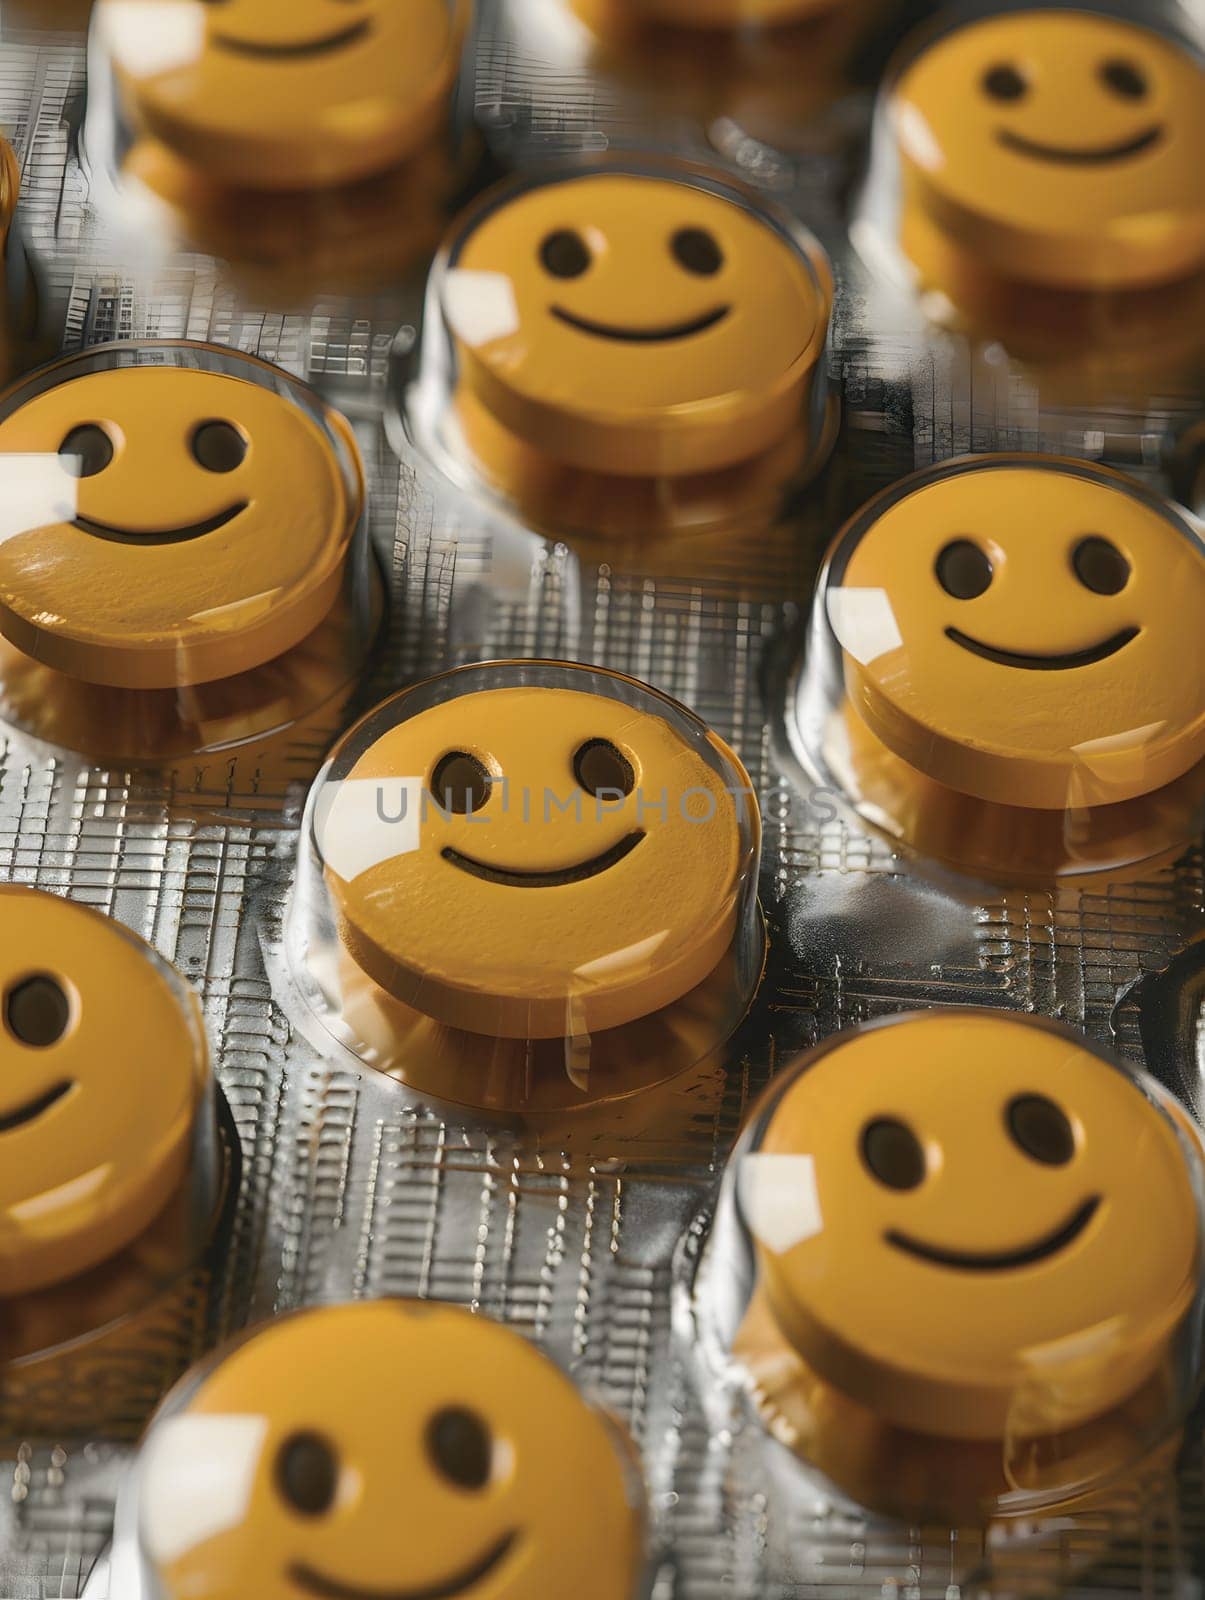 A collection of sunny yellow smiley faces in plastic containers, reminiscent of the joy and sweetness of baked goods. The cheerful facial expressions are sure to bring a smile to anyones face